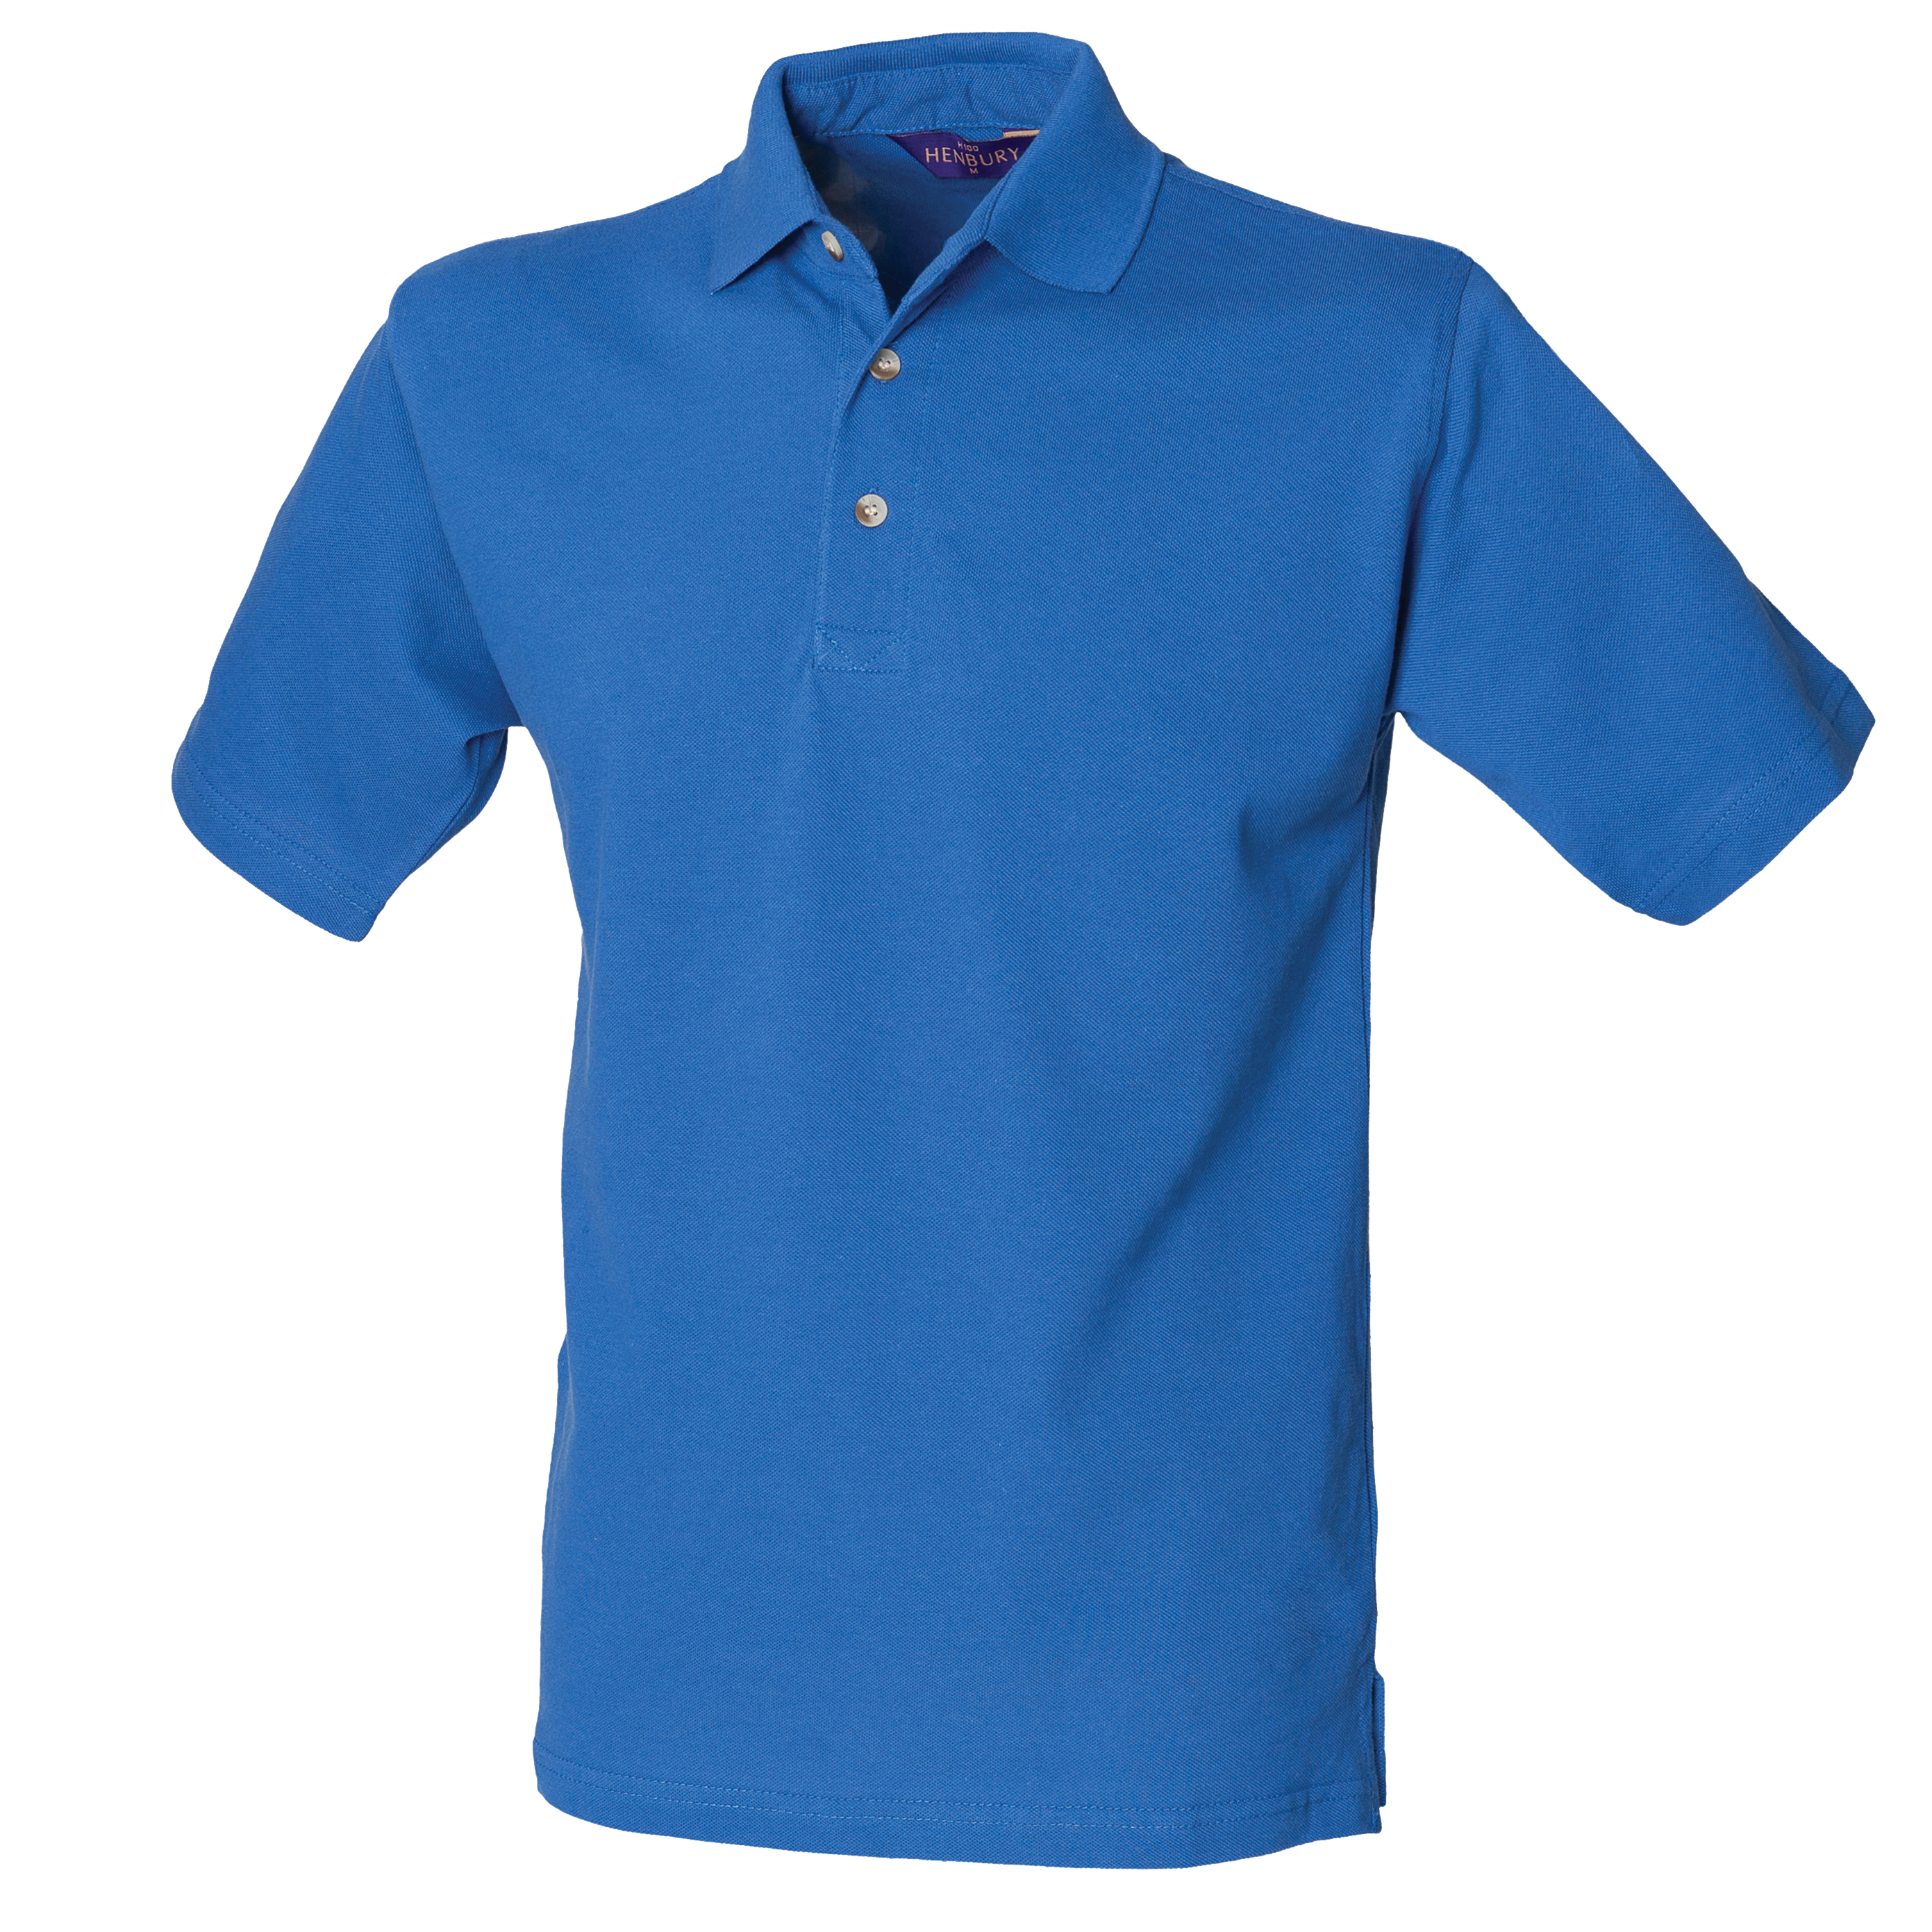 ax-httpswebsystems.s3.amazonaws.comtmp_for_downloadhenbury-classic-cotton-pique-polo-stand-up-royal.jpg